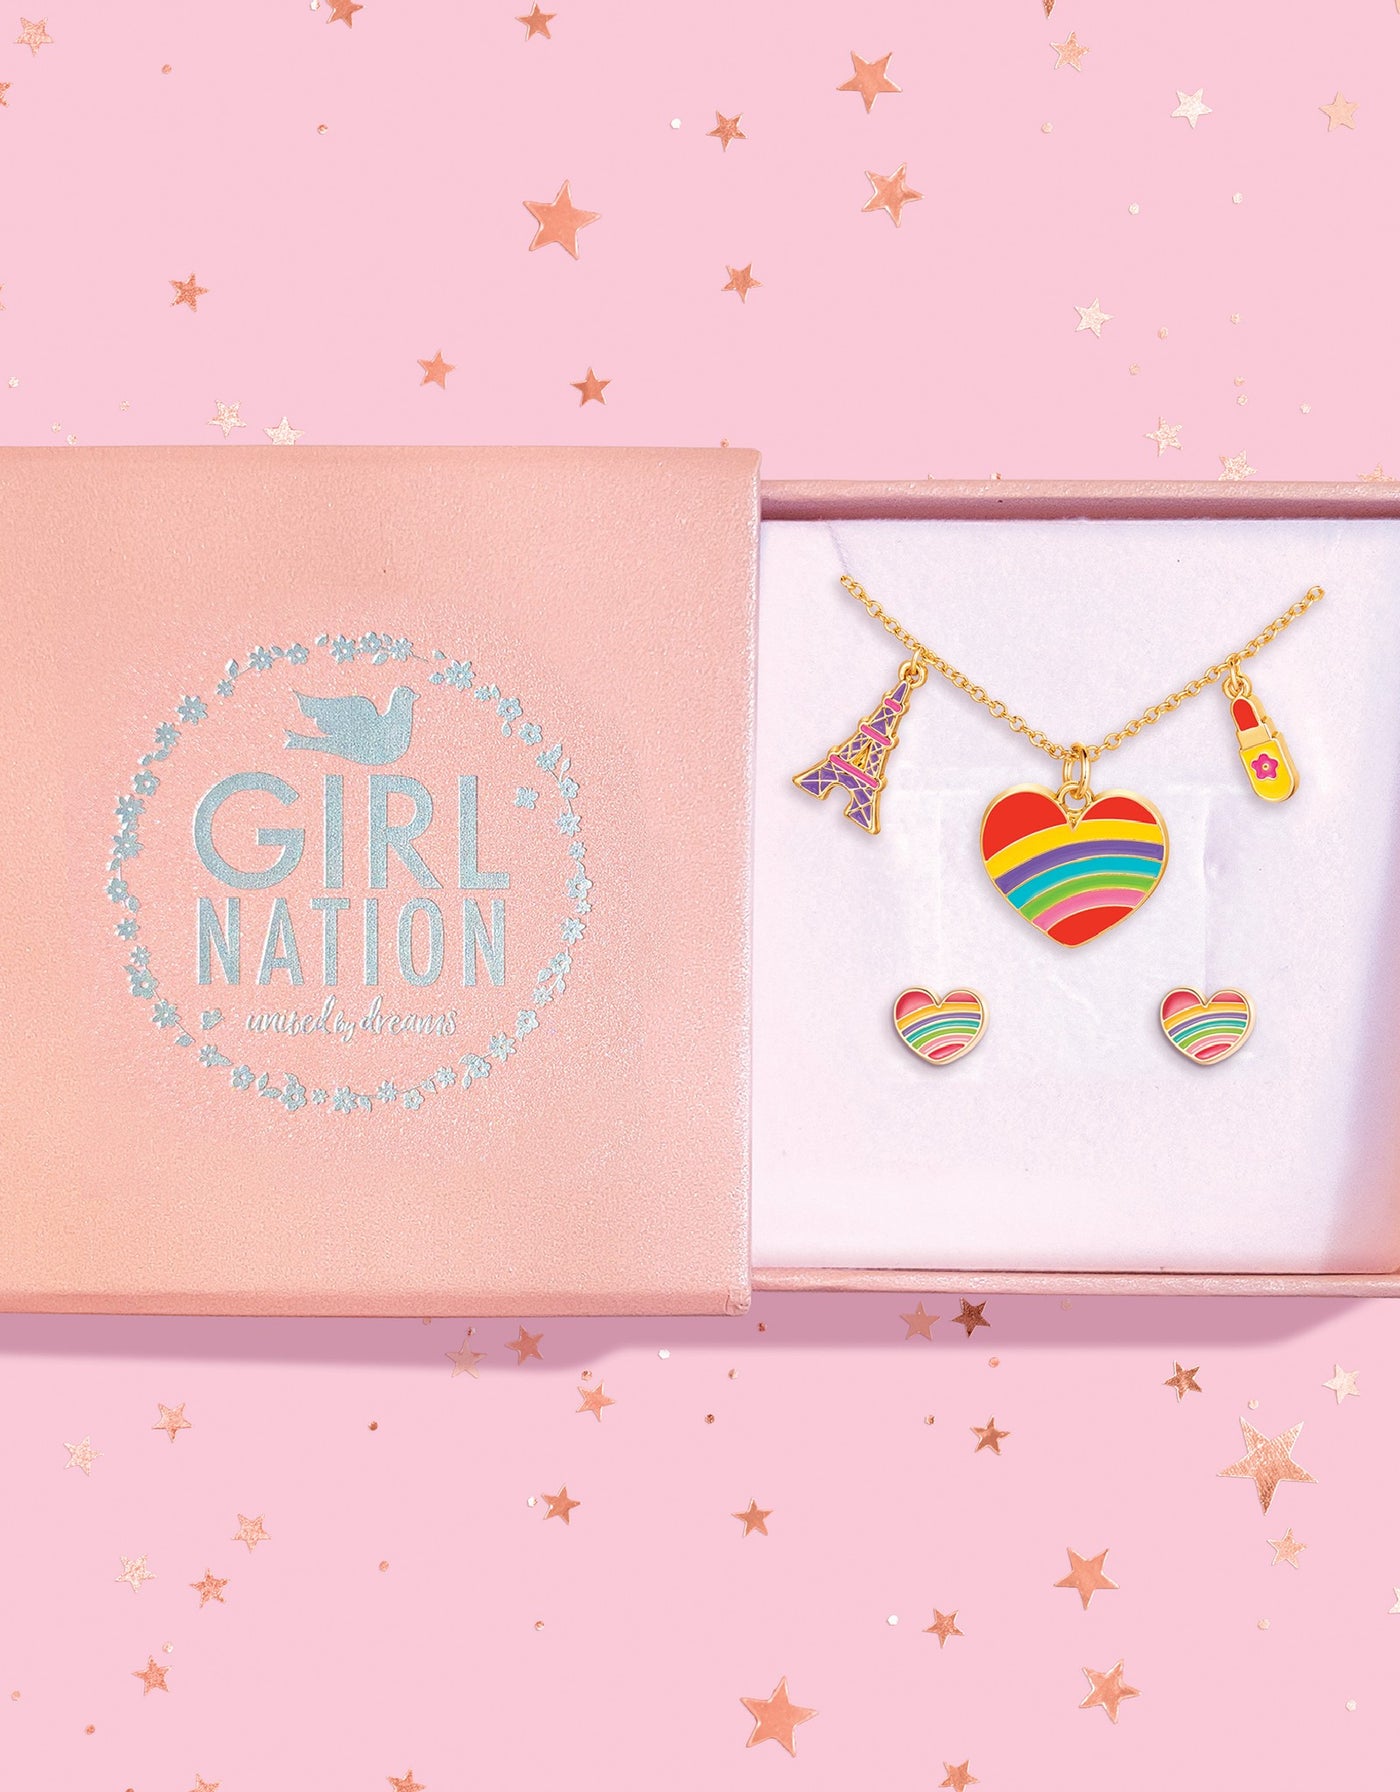 Fantasy necklace and earrings gift set - Heart to Heart - Girl Nation